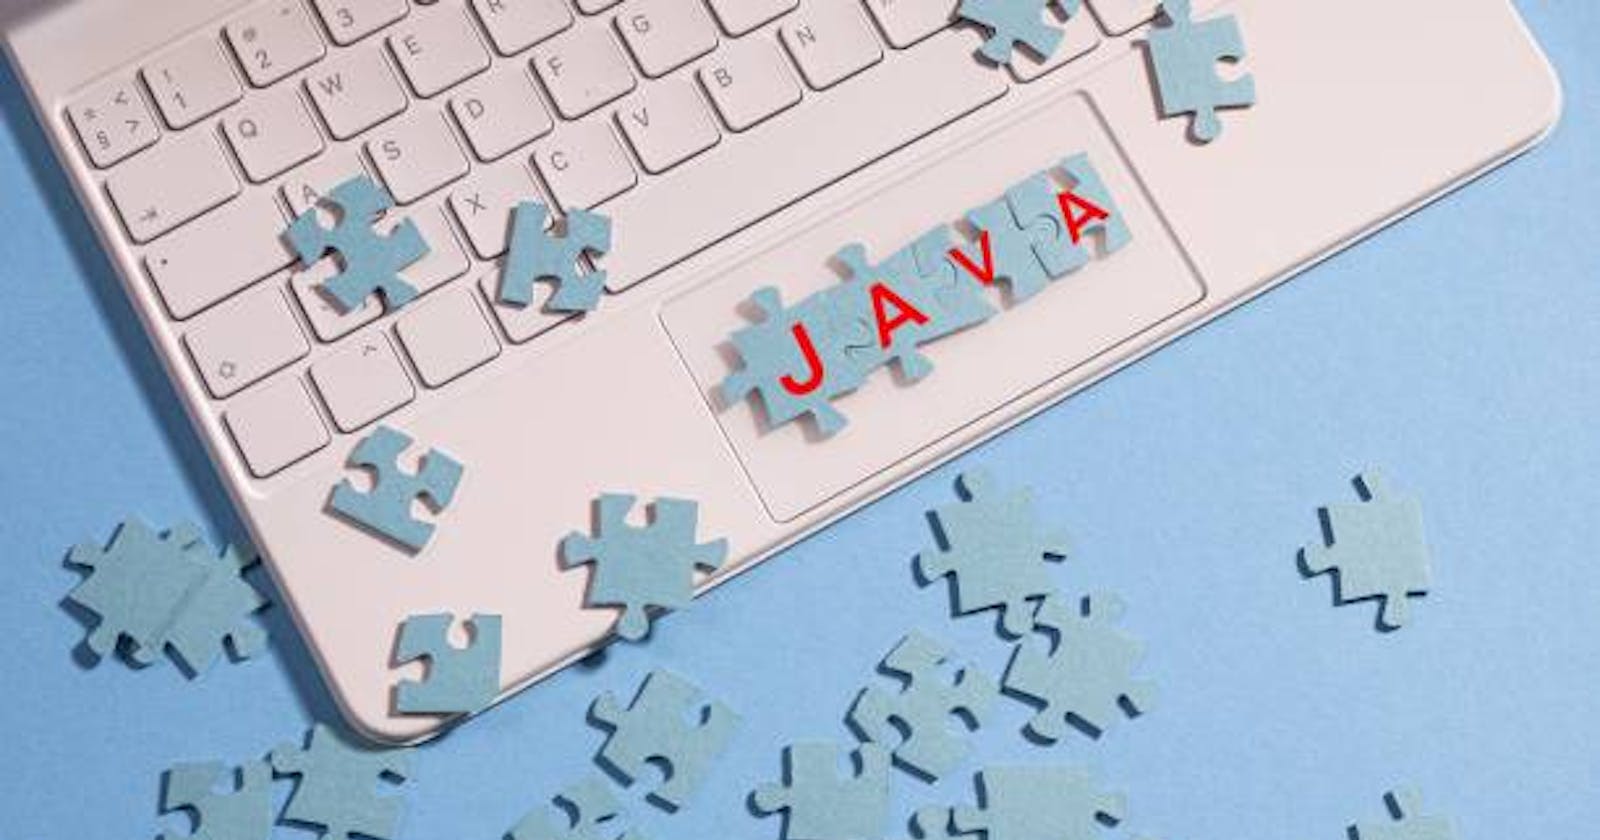 Basic Java Questions and Answers (Part 2) - Constructors